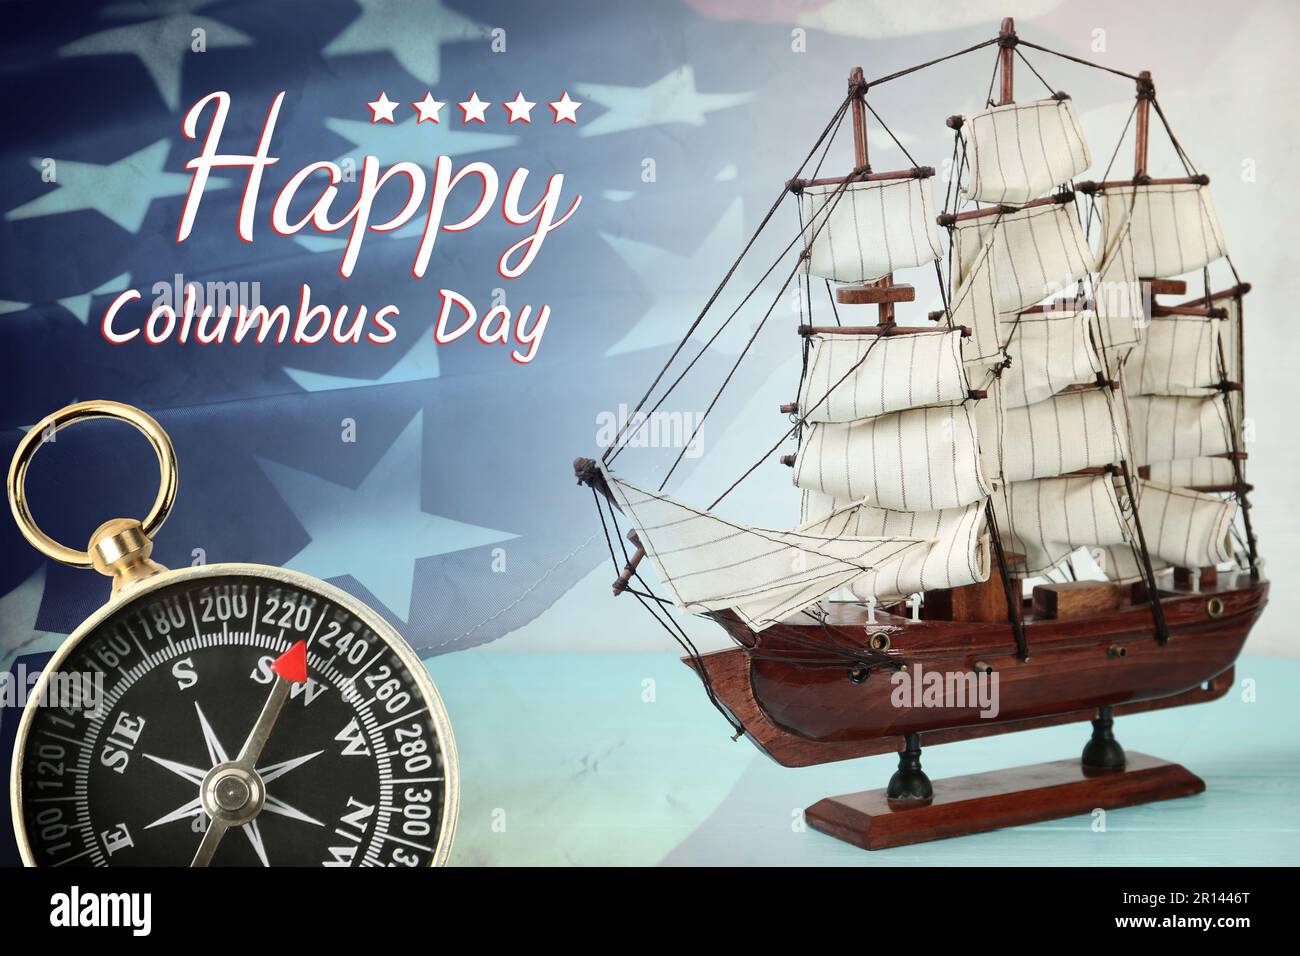 Happy Columbus Day. Beautiful ship model, compass and American flag Stock Photo